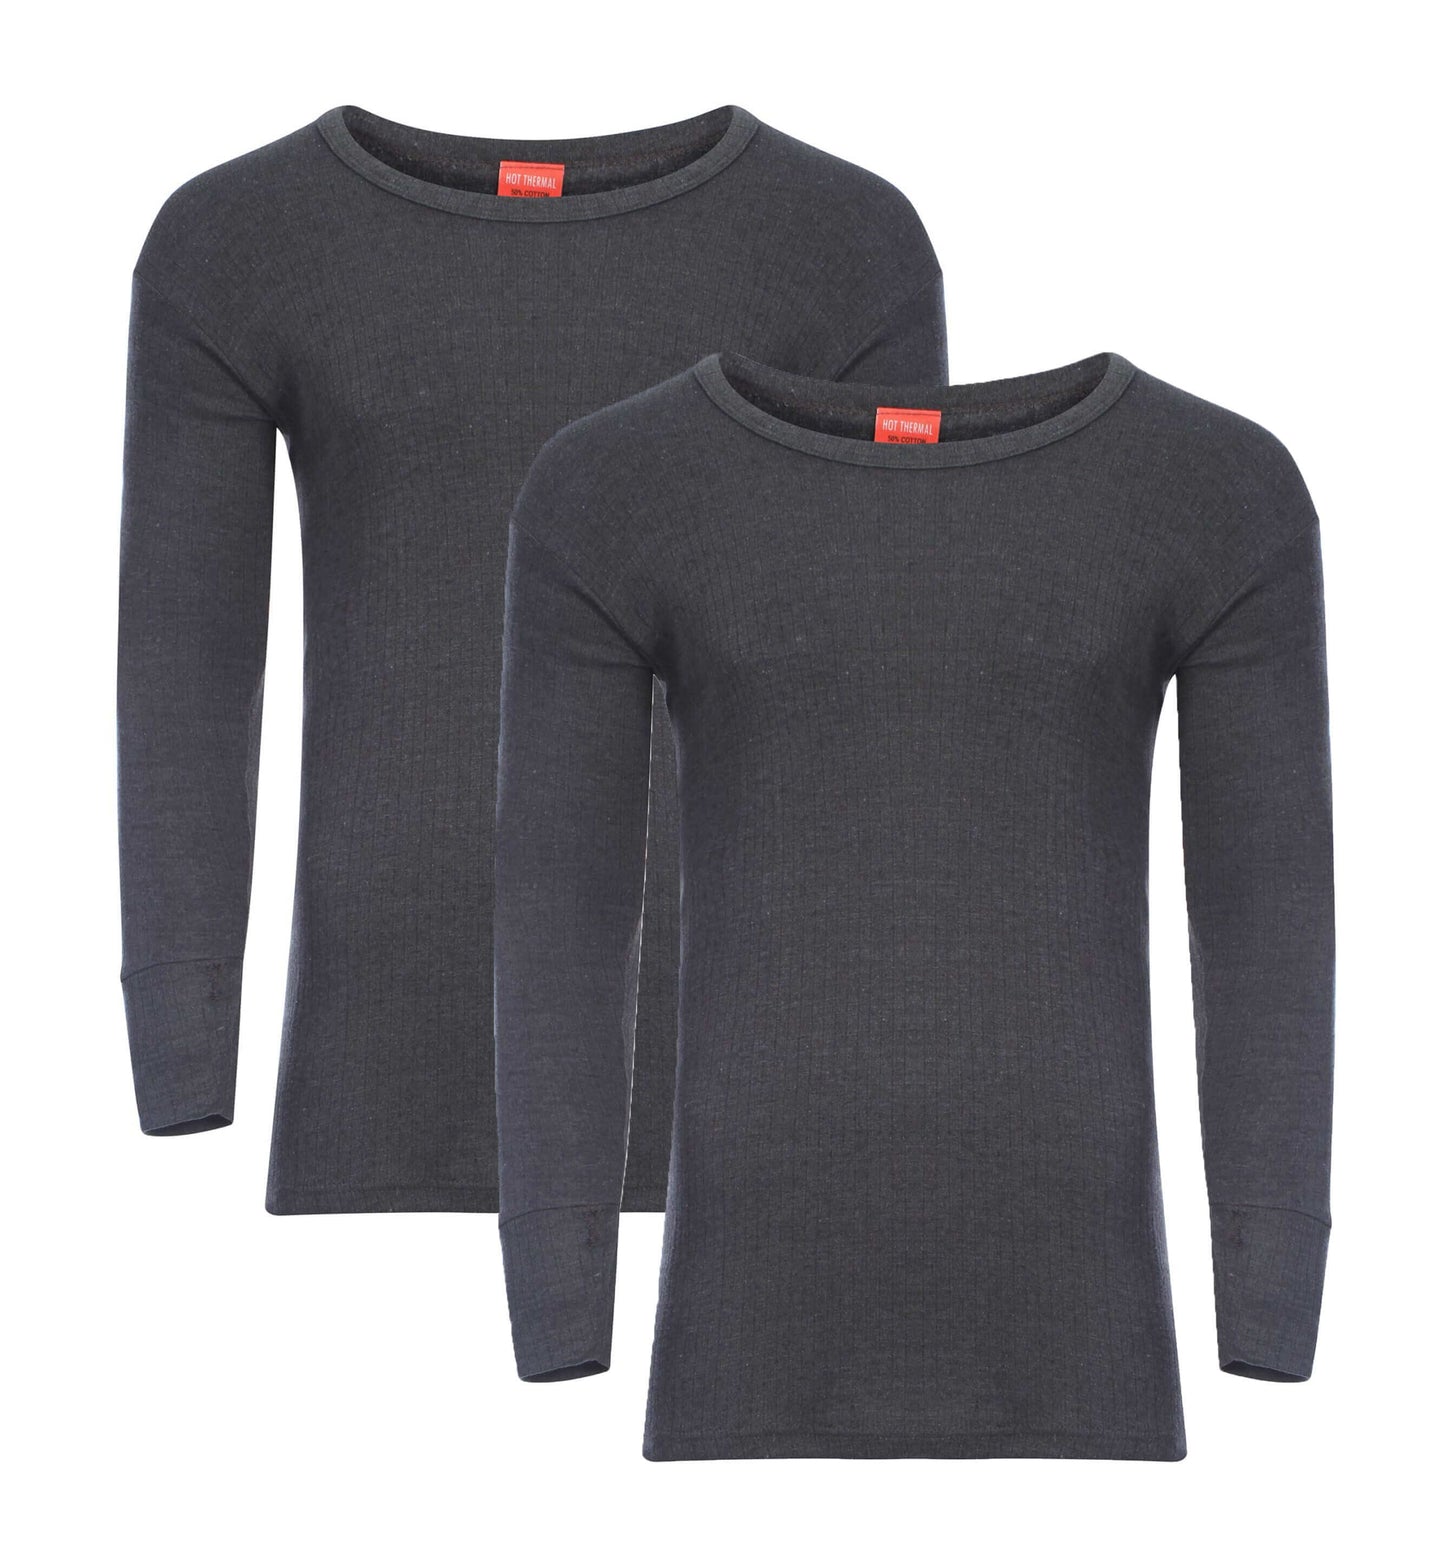 Heatwave® Pack Of 2 Men's Thermal Long Sleeve Top, Warm Underwear Baselayer. Buy now for £12.00. A Thermal Underwear by Heatwave Thermalwear. baselayer, black, blue, charcoal, grey, heatwave, hiking, large, long johns, long sleeve, marl grey, medium, mens